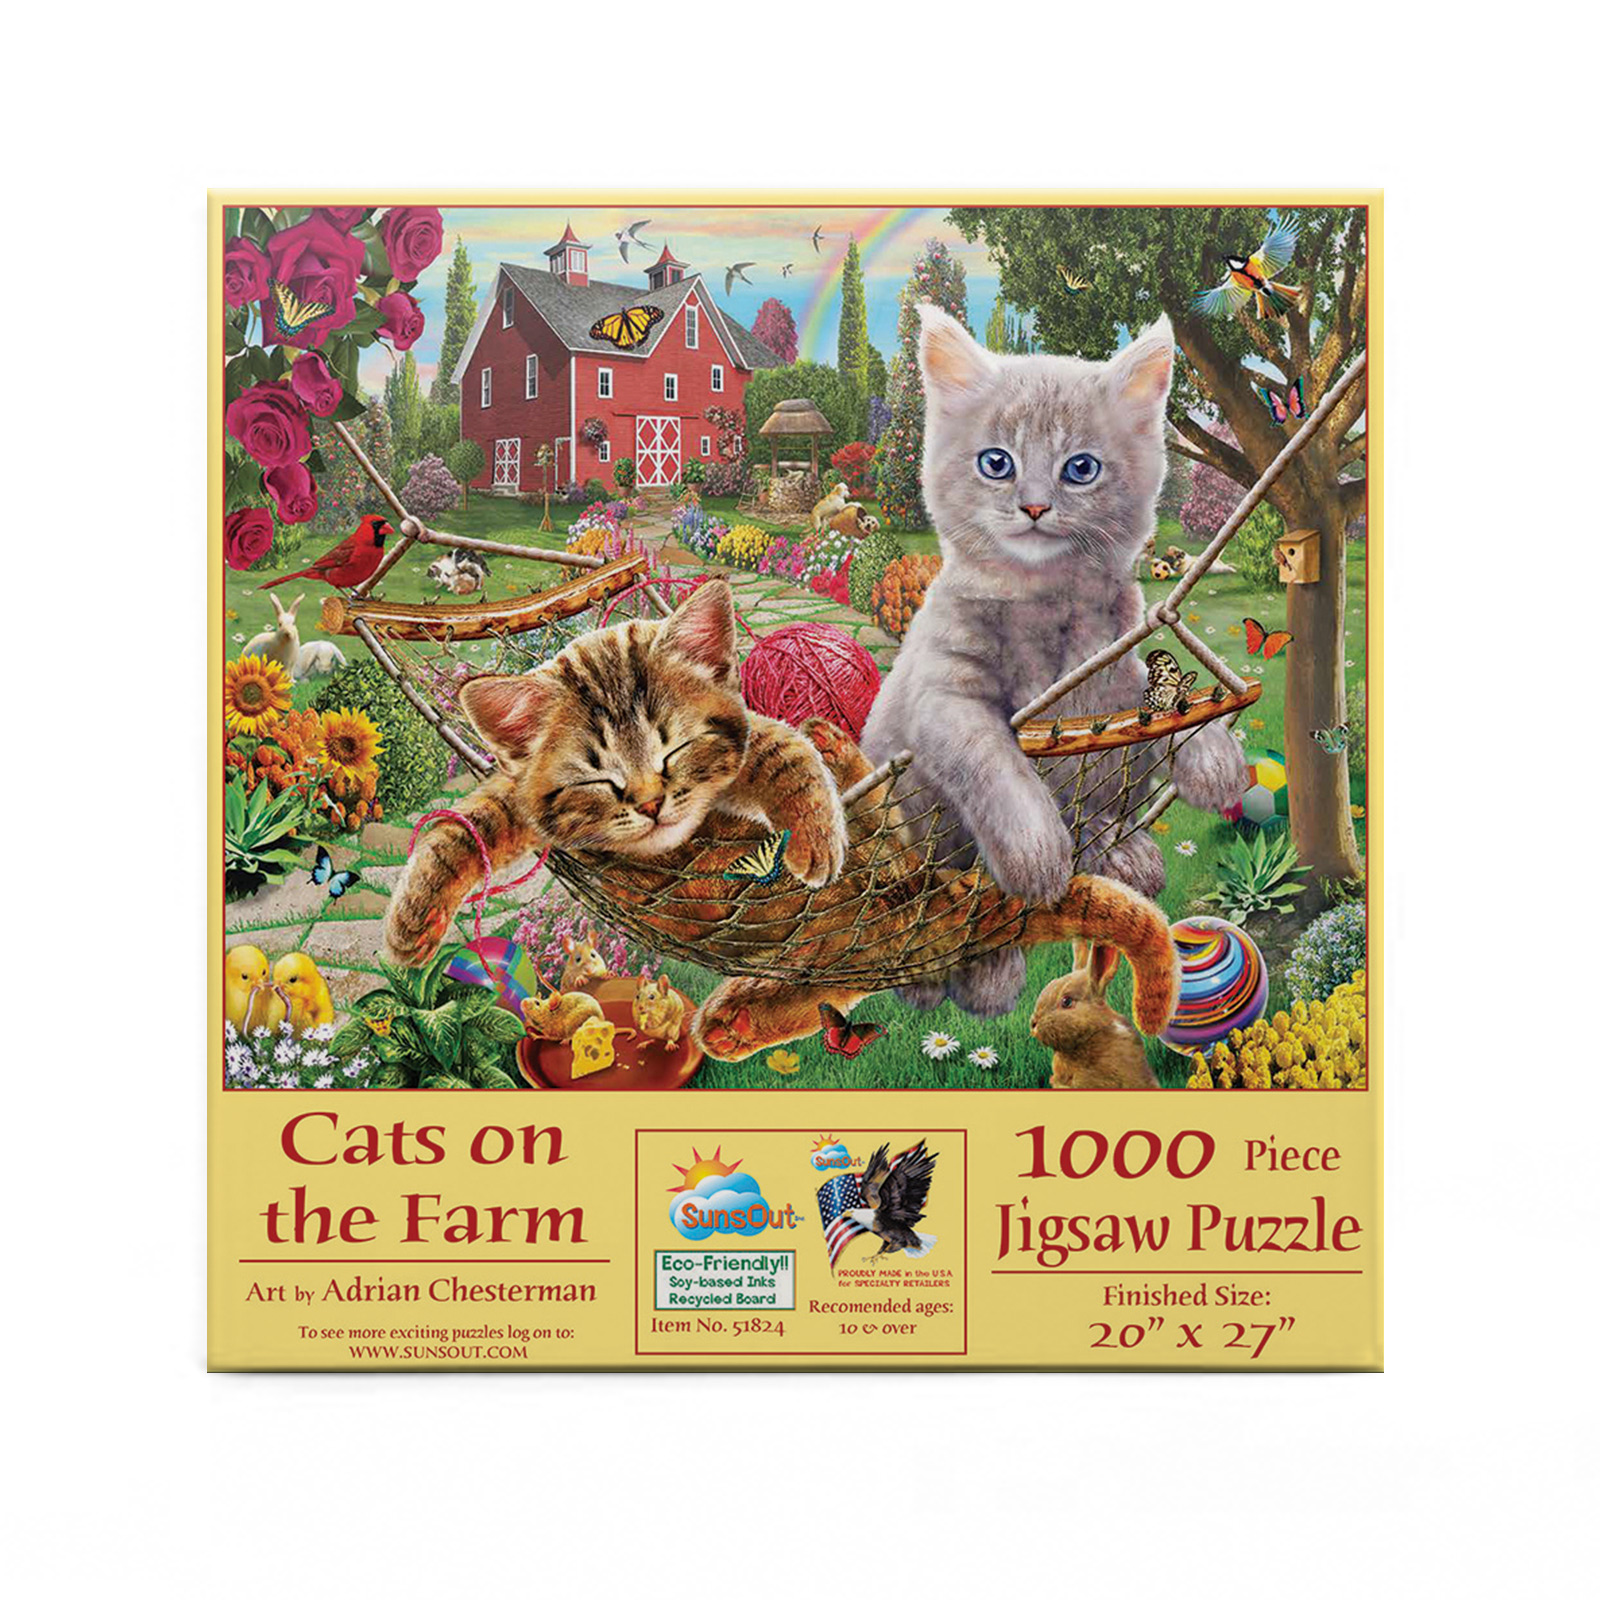 Cats on the Farm